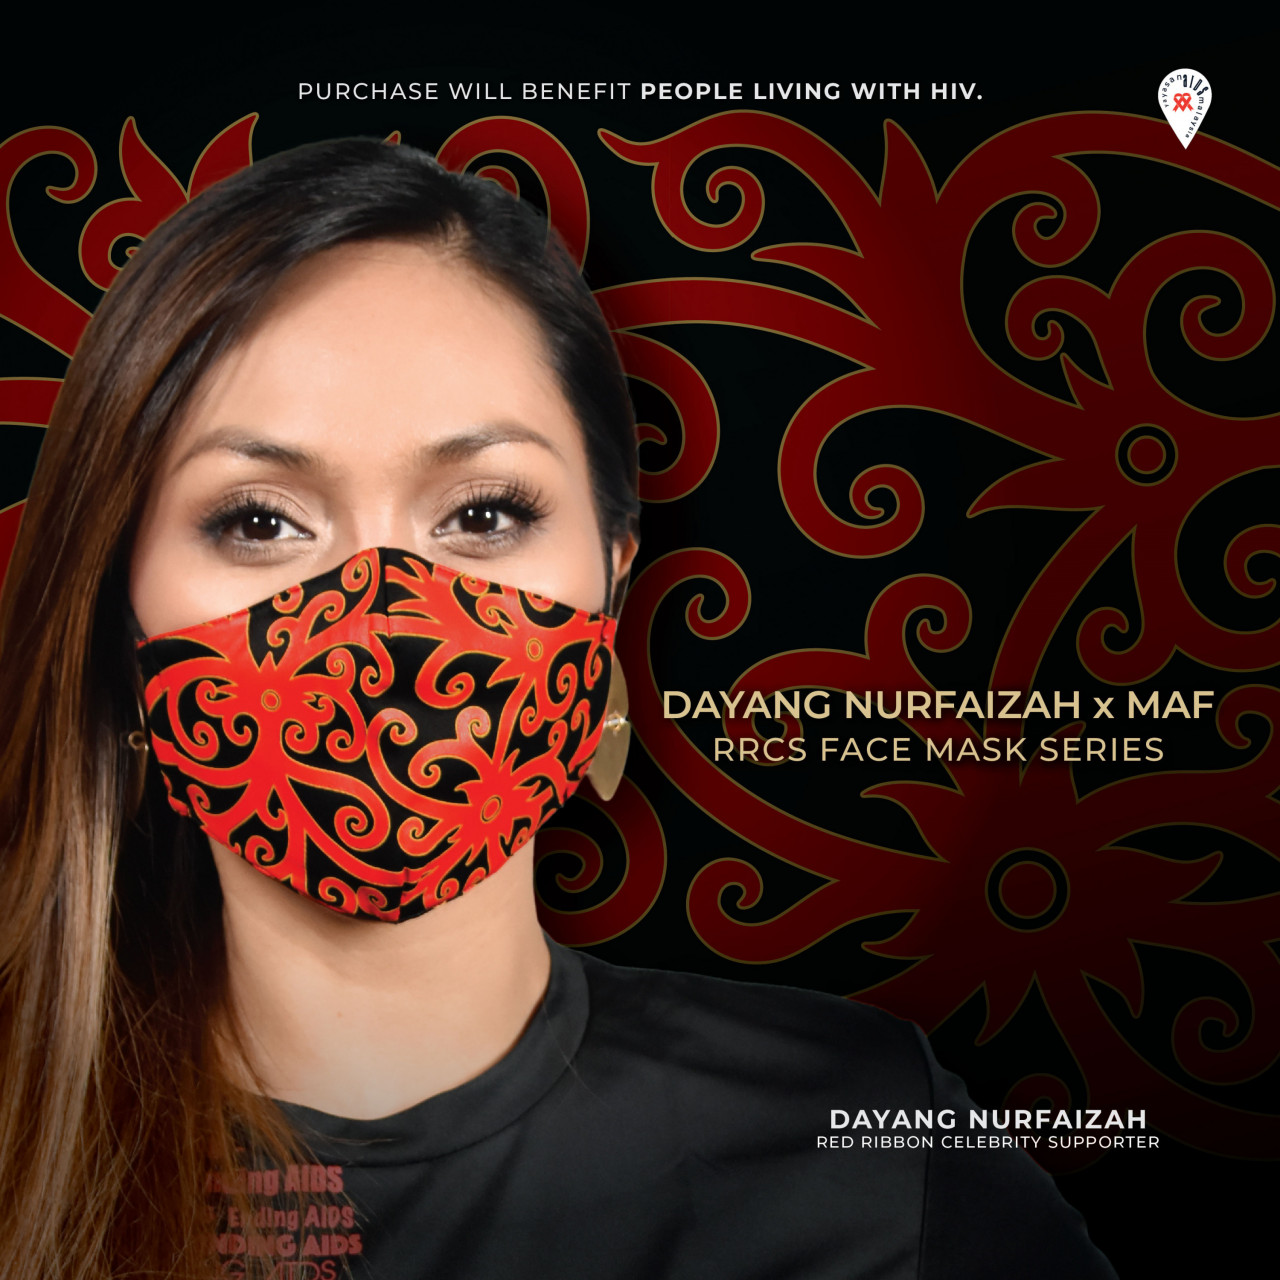 'It is timely as face masks are mandatory as a daily necessity,' says Dayang Norfaizah. – Pic courtesy of Malaysian AIDS Foundation